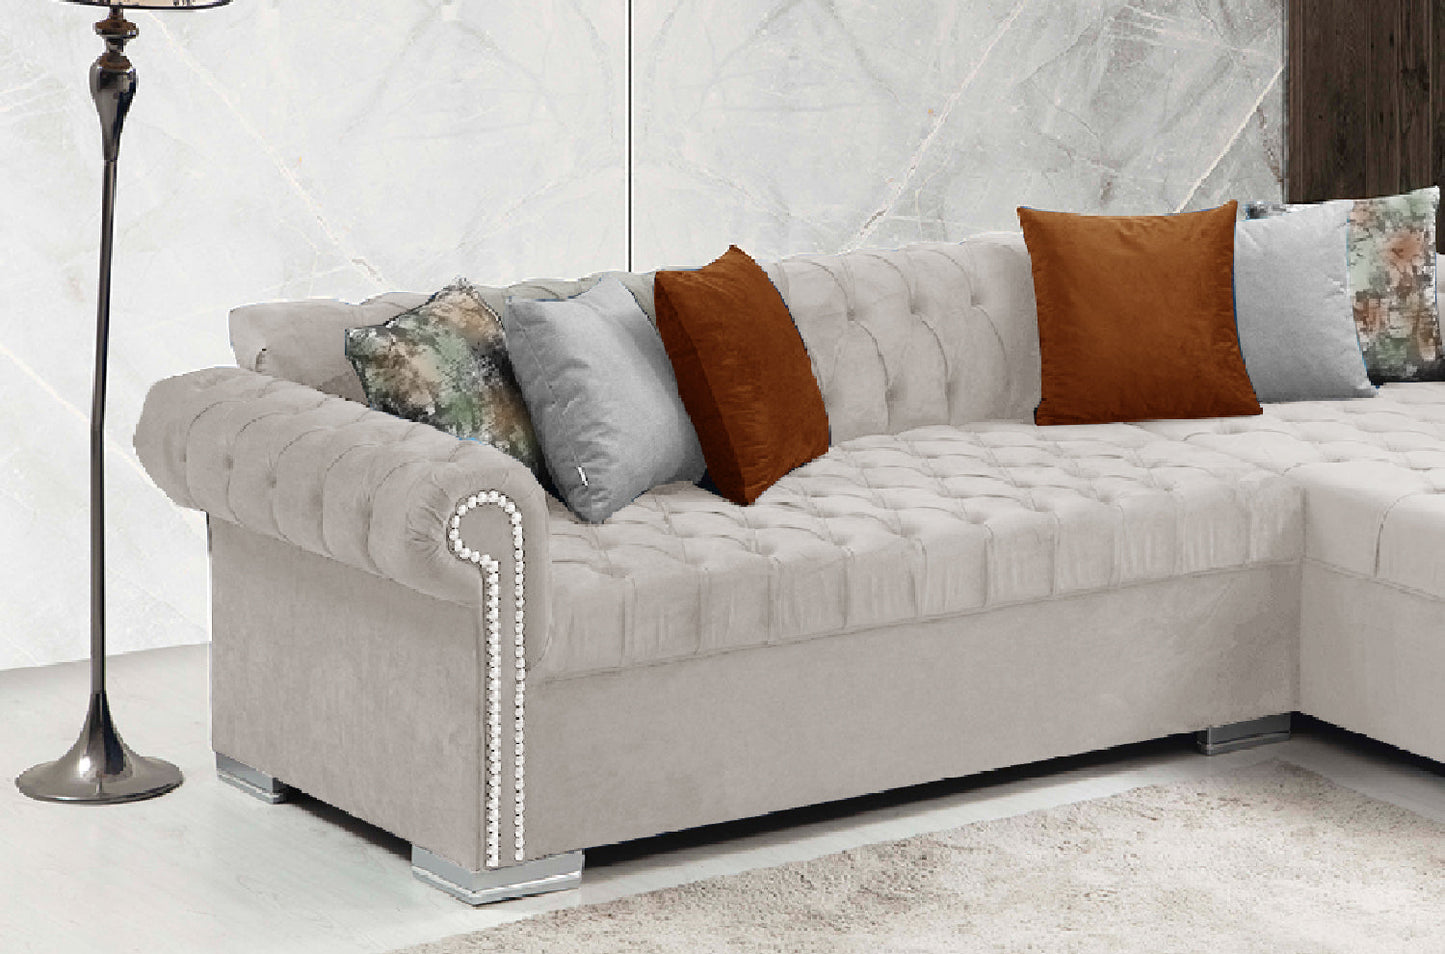 Icarus  L Double Chase Sectional Velvet Upholstery - Rose